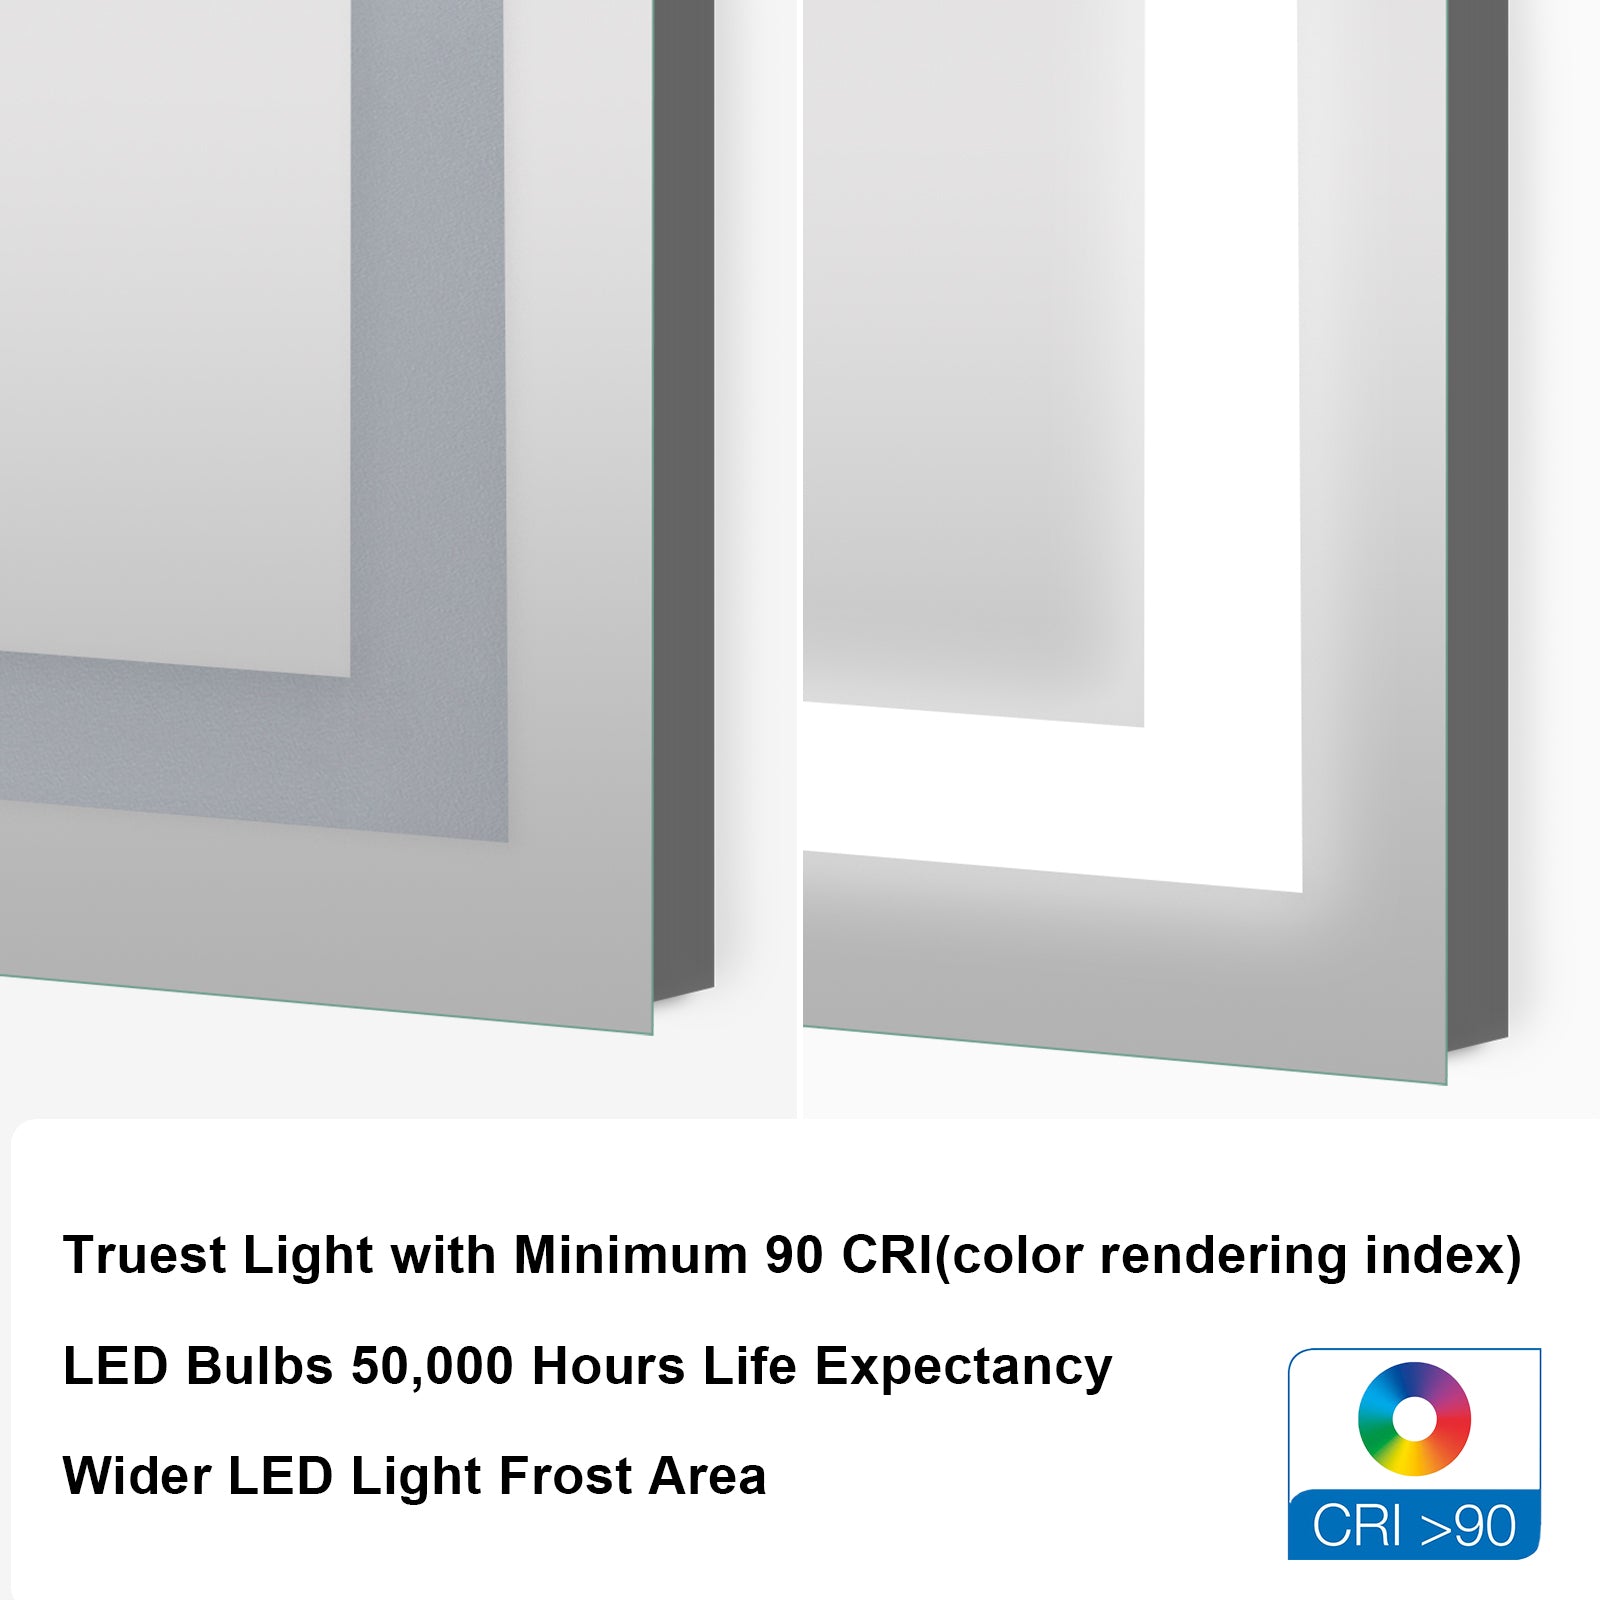 28x36 Inch LED Lighted Bathroom Mirror with 3 Colors silver-aluminium